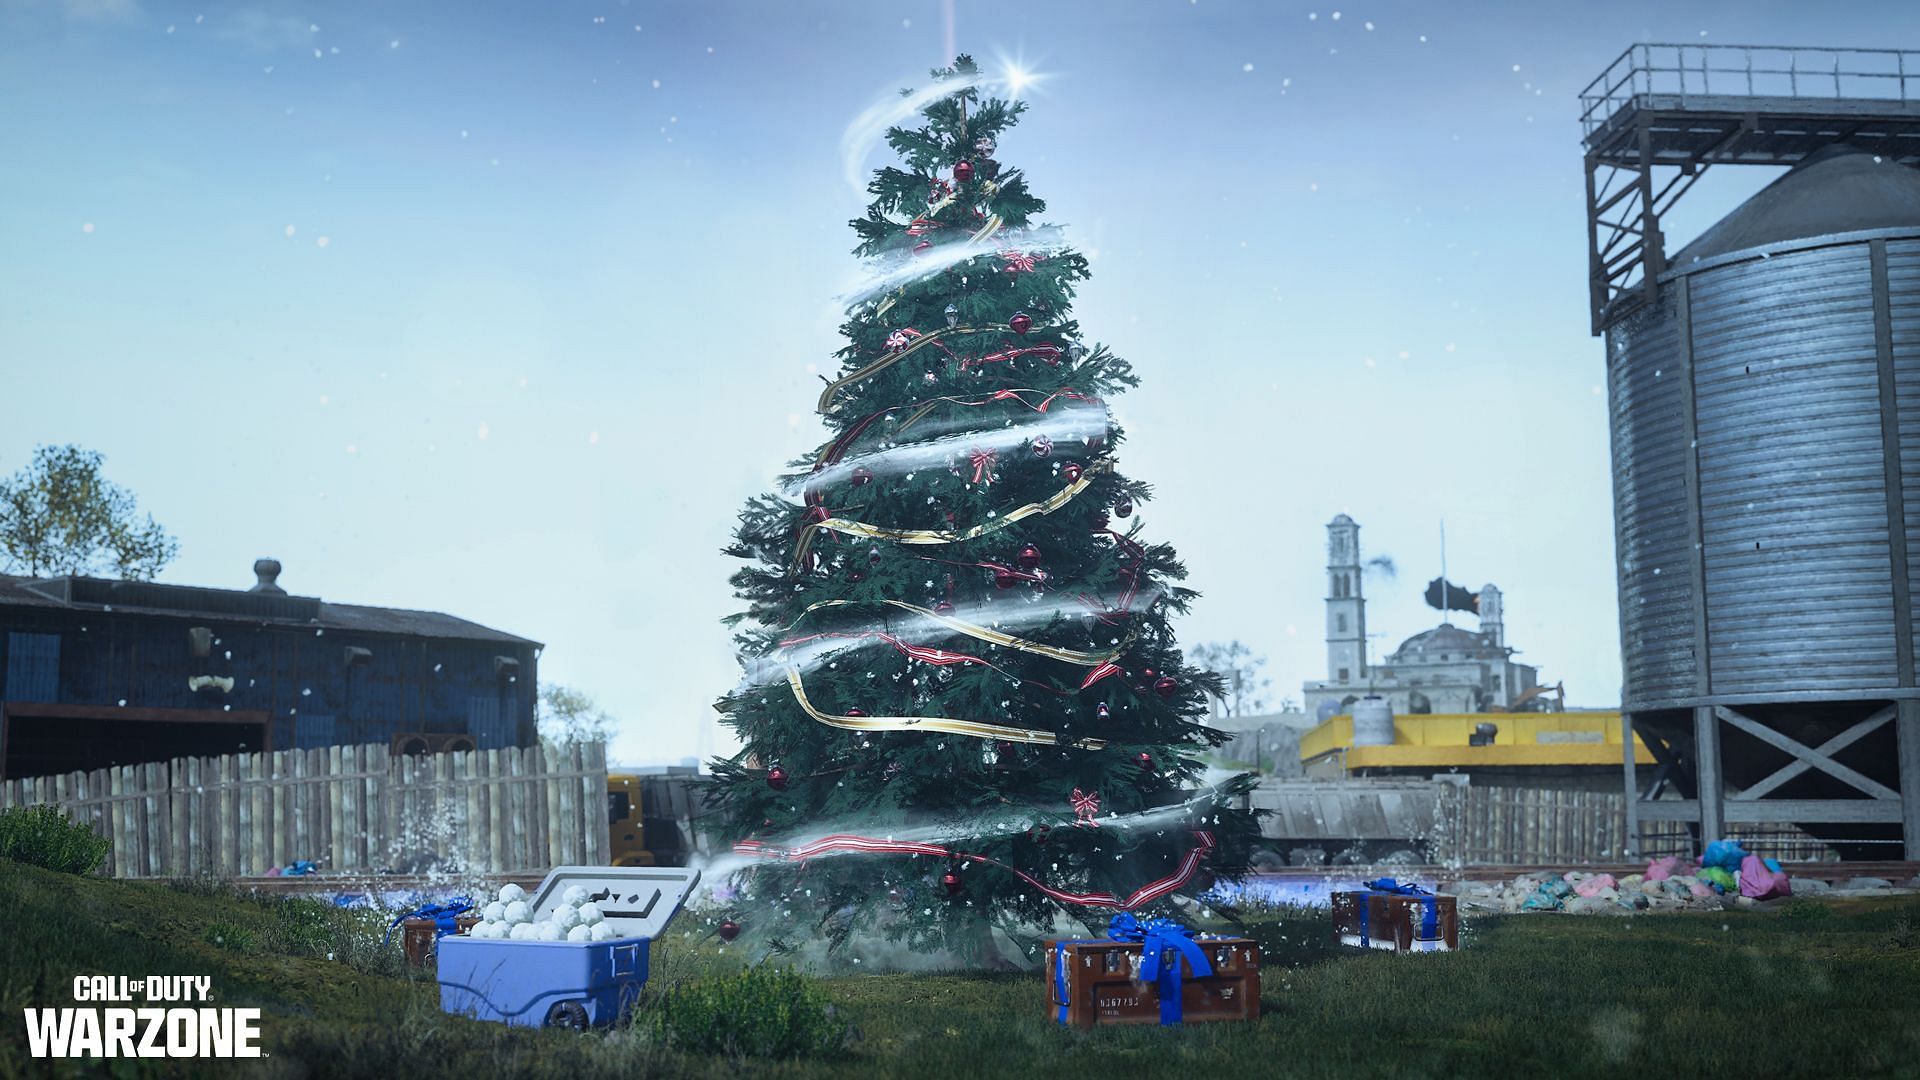 Holiday decorations in Warzone (Image via Activision)